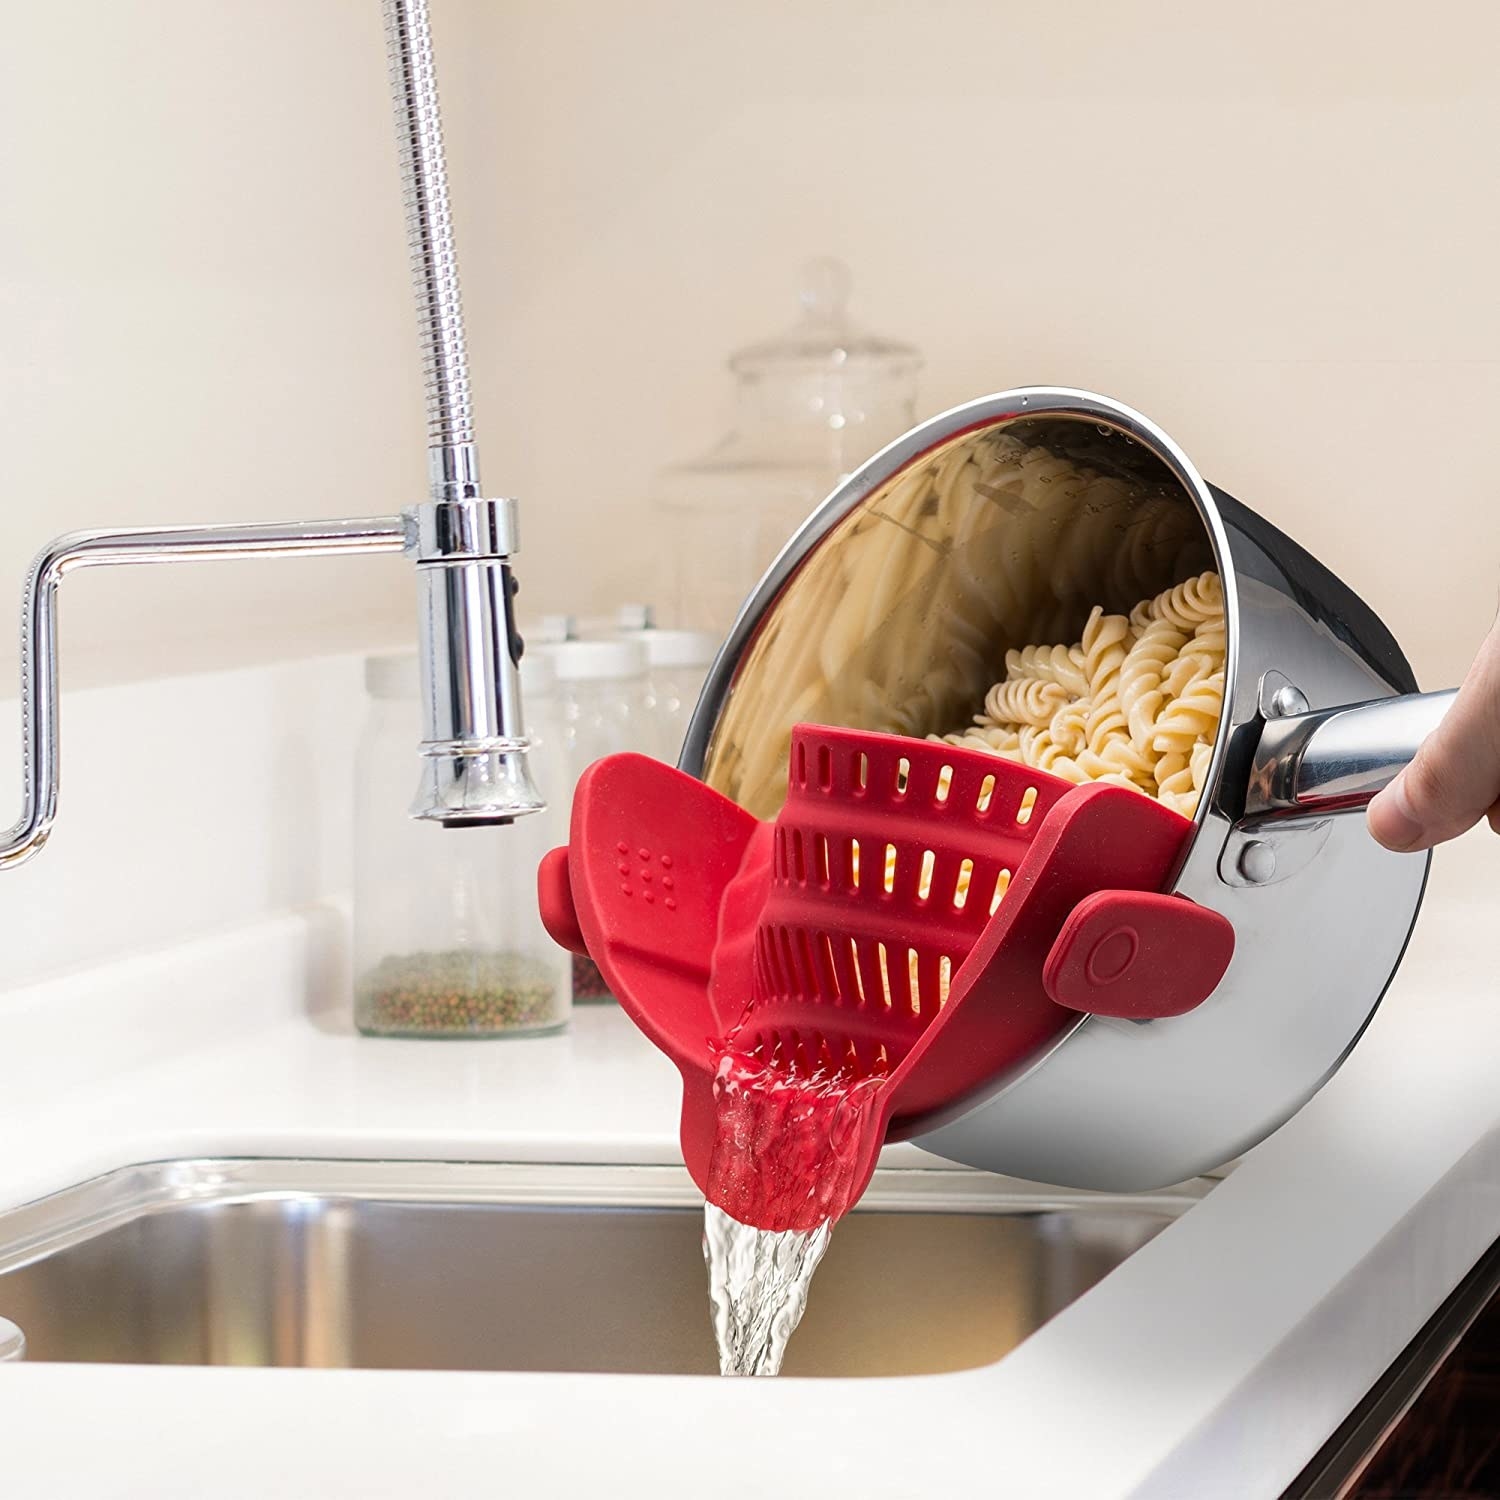 The strainer on a pot, straining pasta over a sink